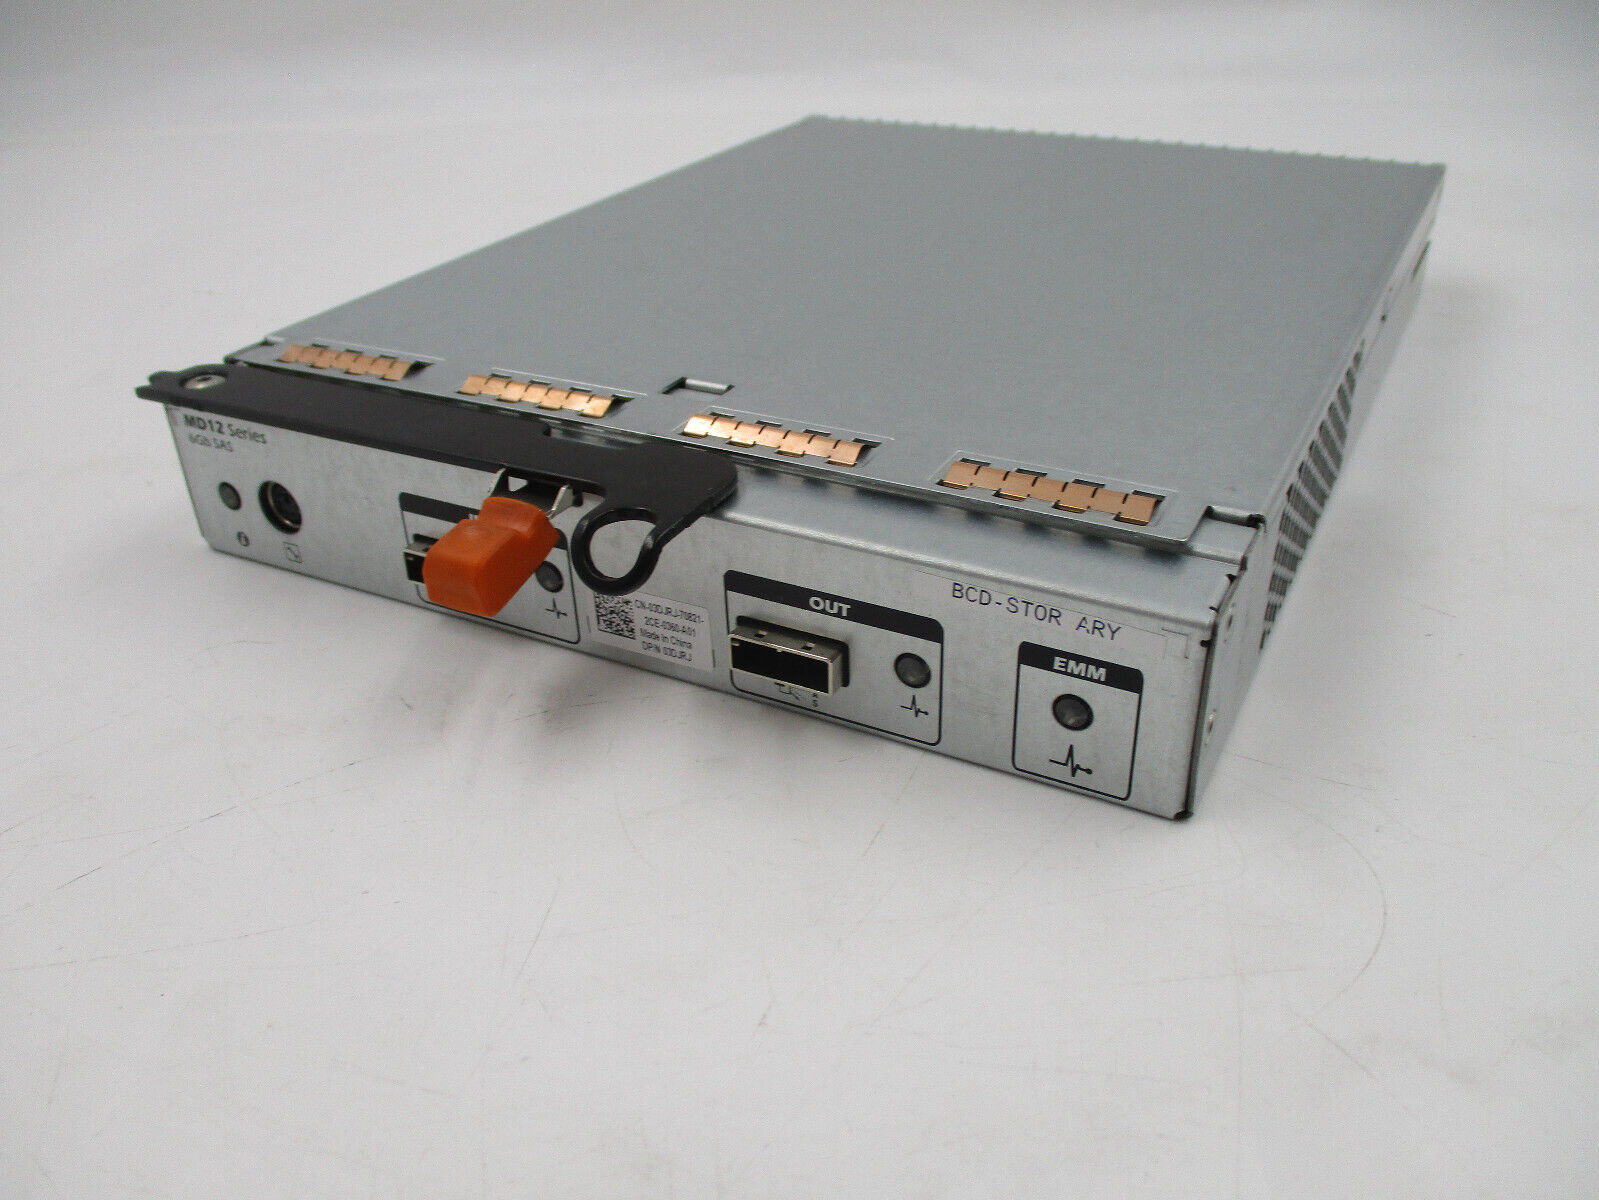 Dell PowerVault MD1200 Storage Array Module 6Gbs Dell P/N: 03DJRJ Tested Working